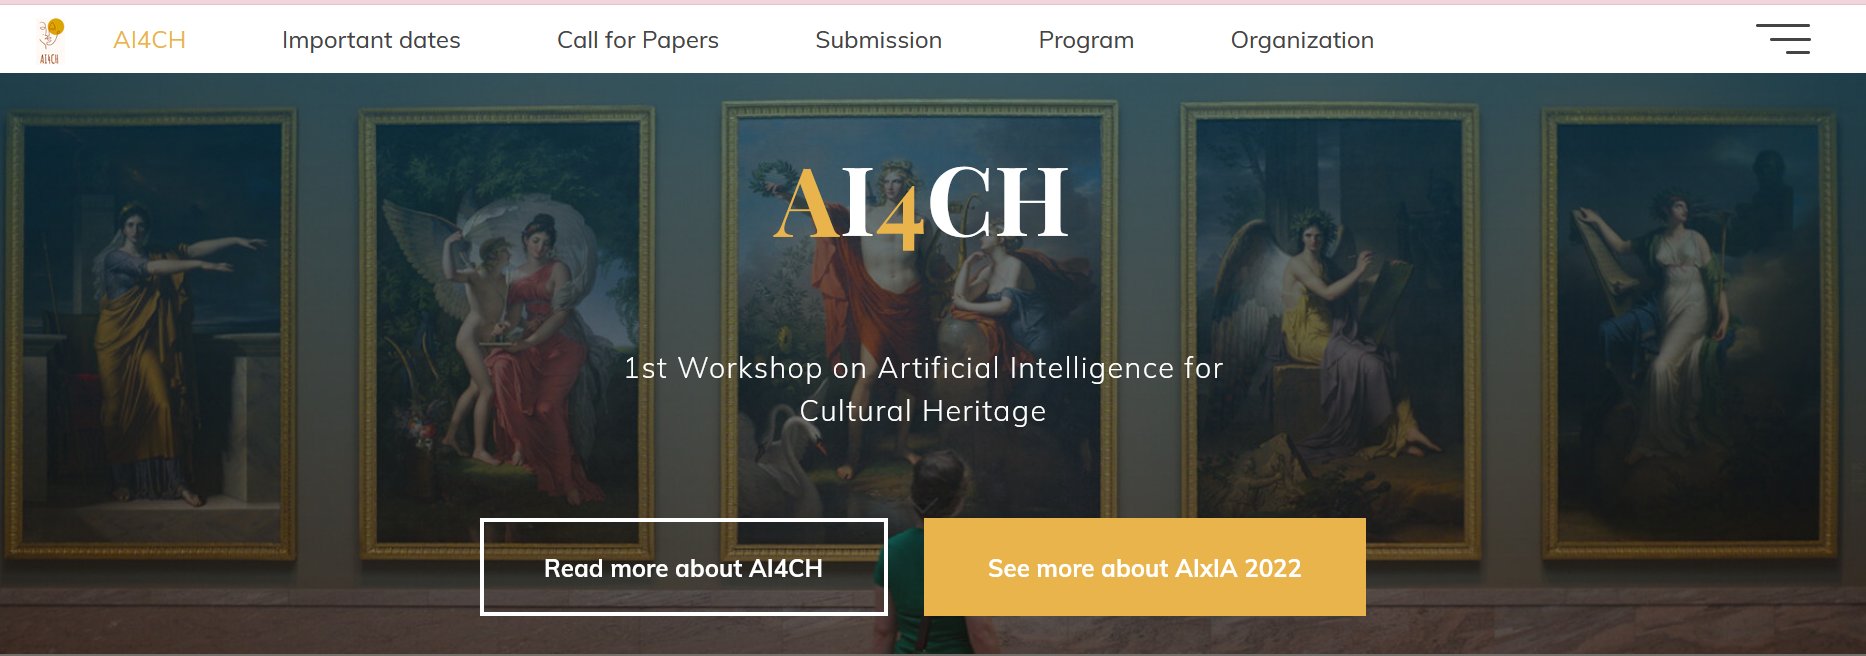 UMIL PARTICIPATION IN AI4CH2022